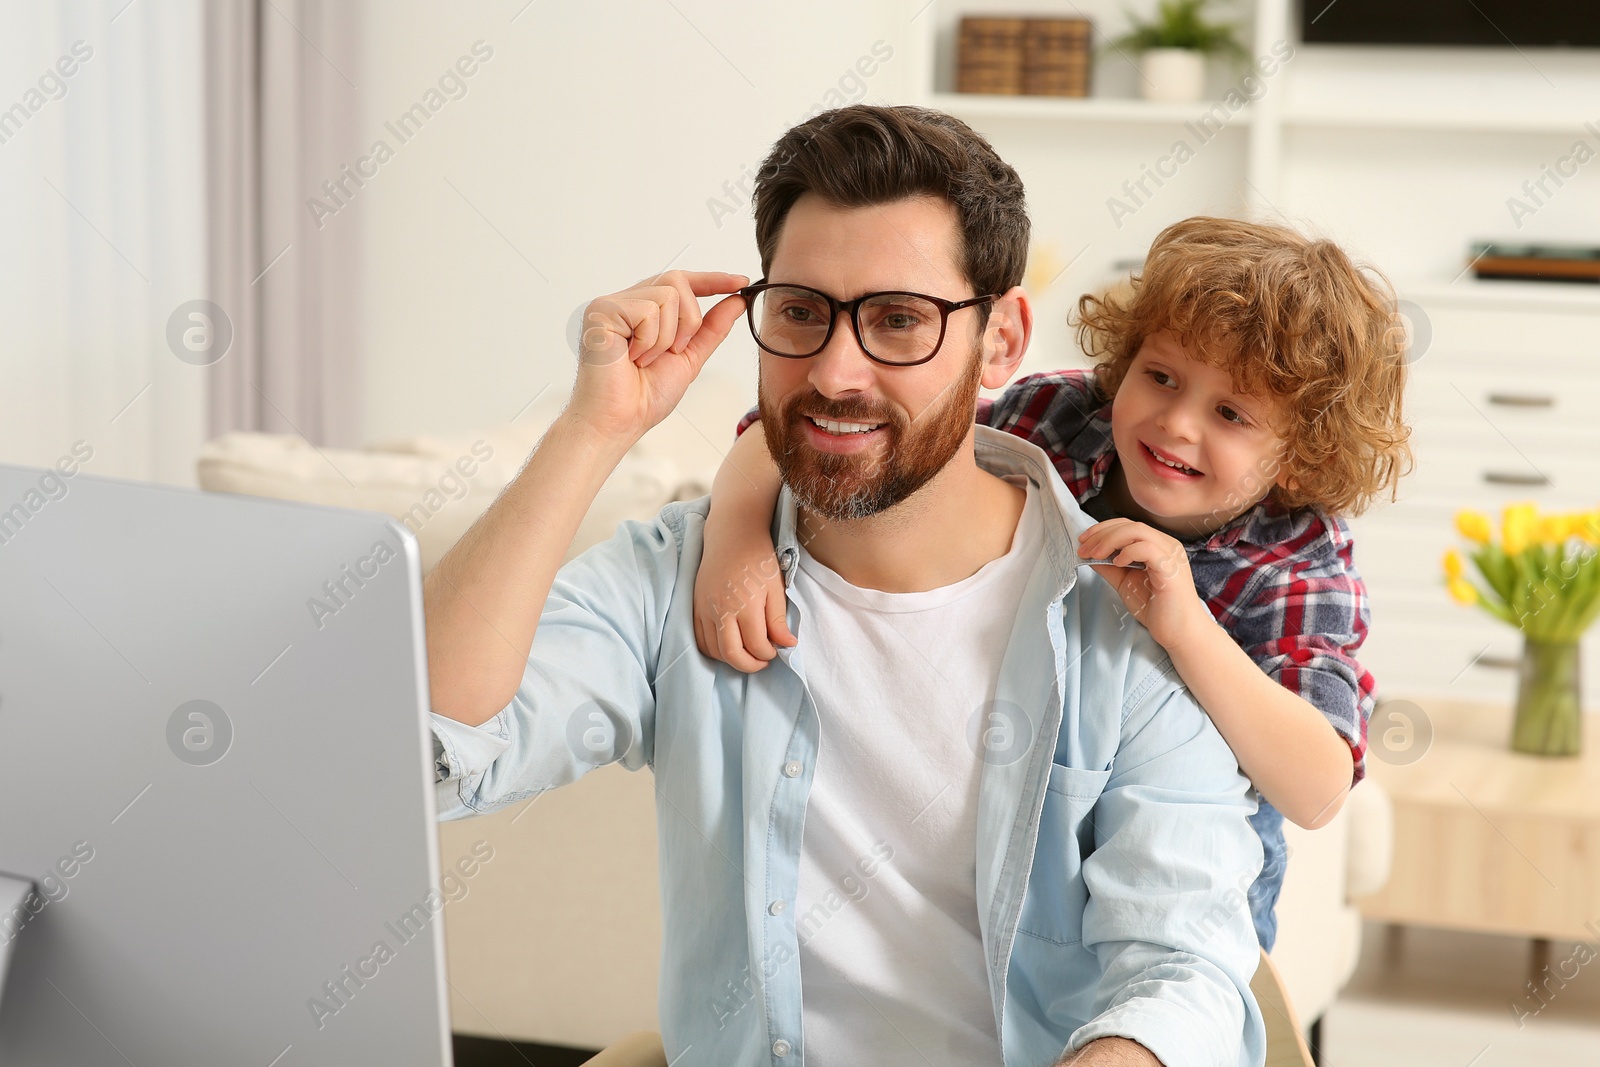 Photo of Man working remotely at home. Father with his child at desk